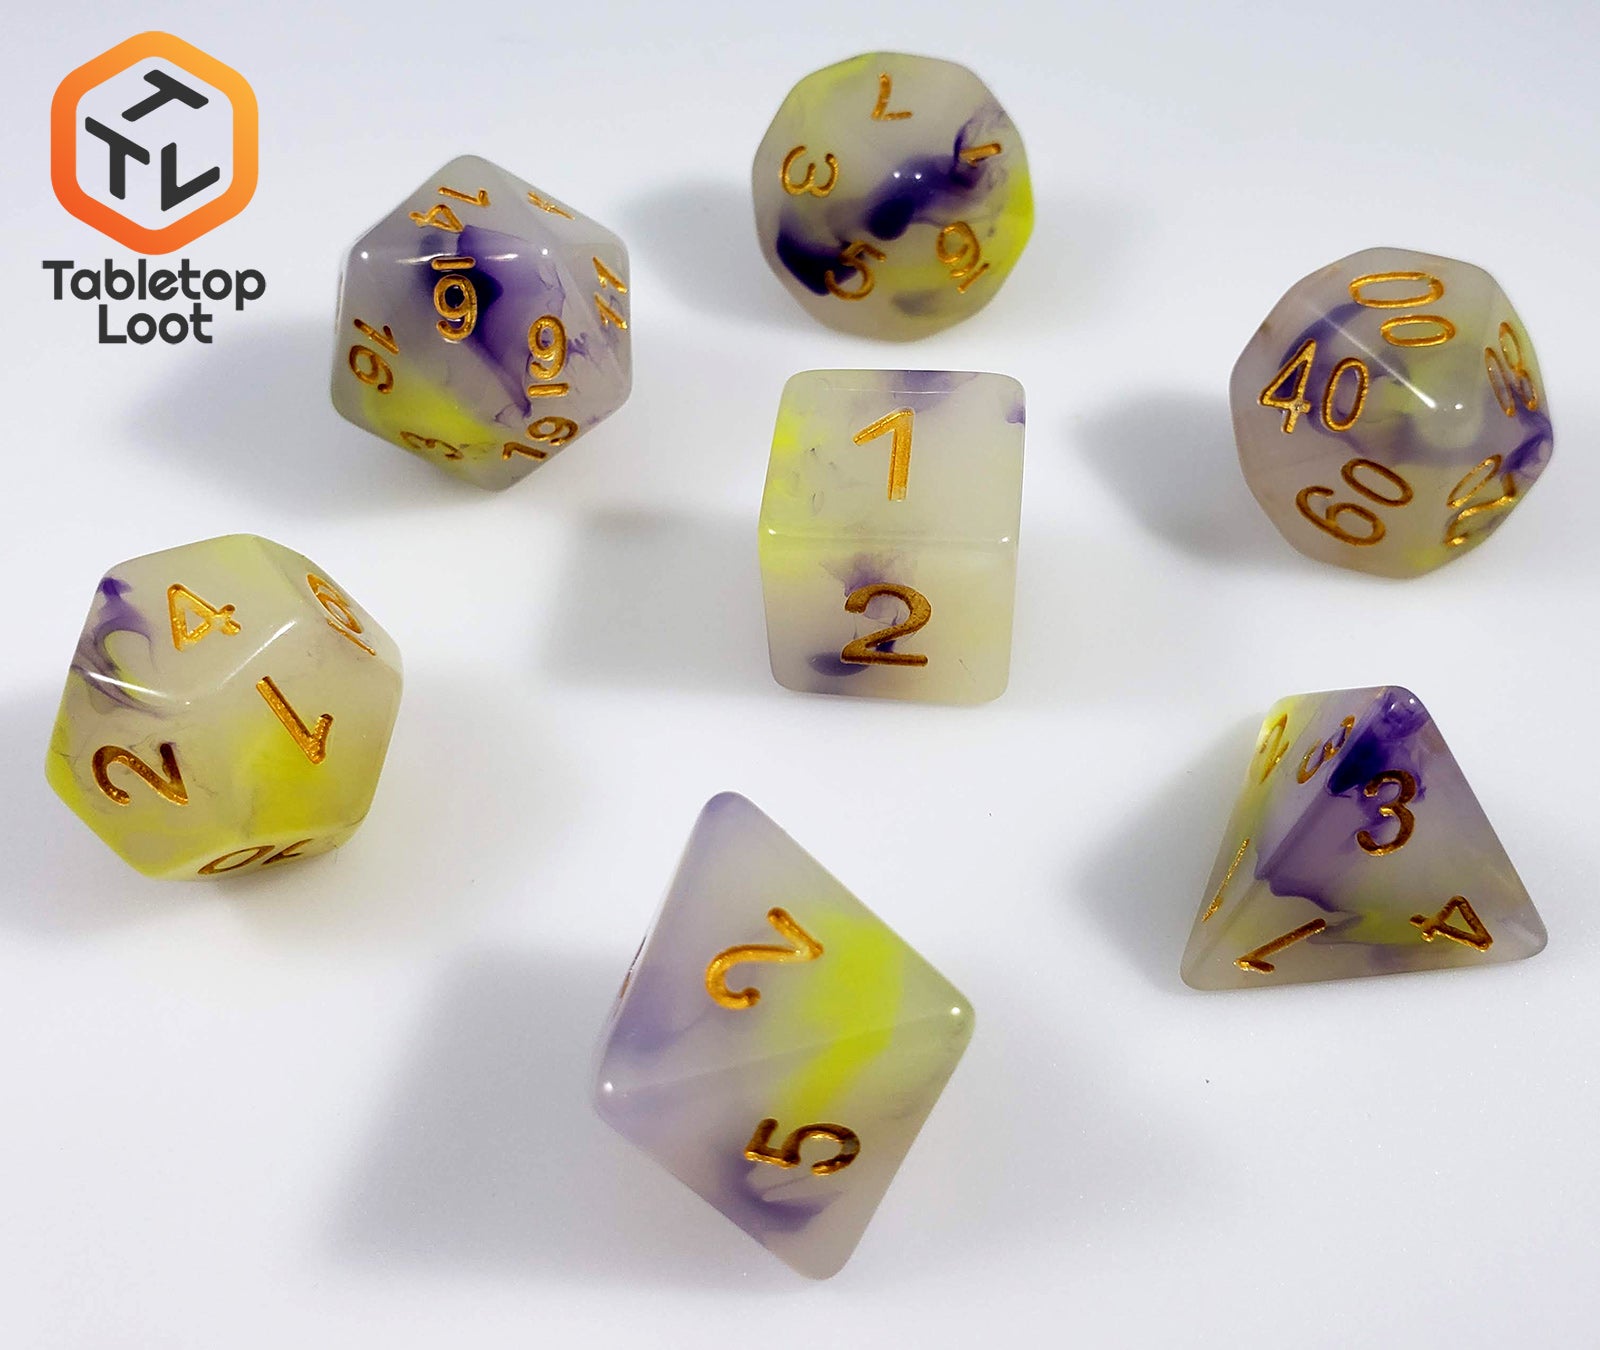 The Fields of Wildflowers 7 piece dice set from Tabletop Loot with swirls of purple and yellow in a milky resin and gold numbering.